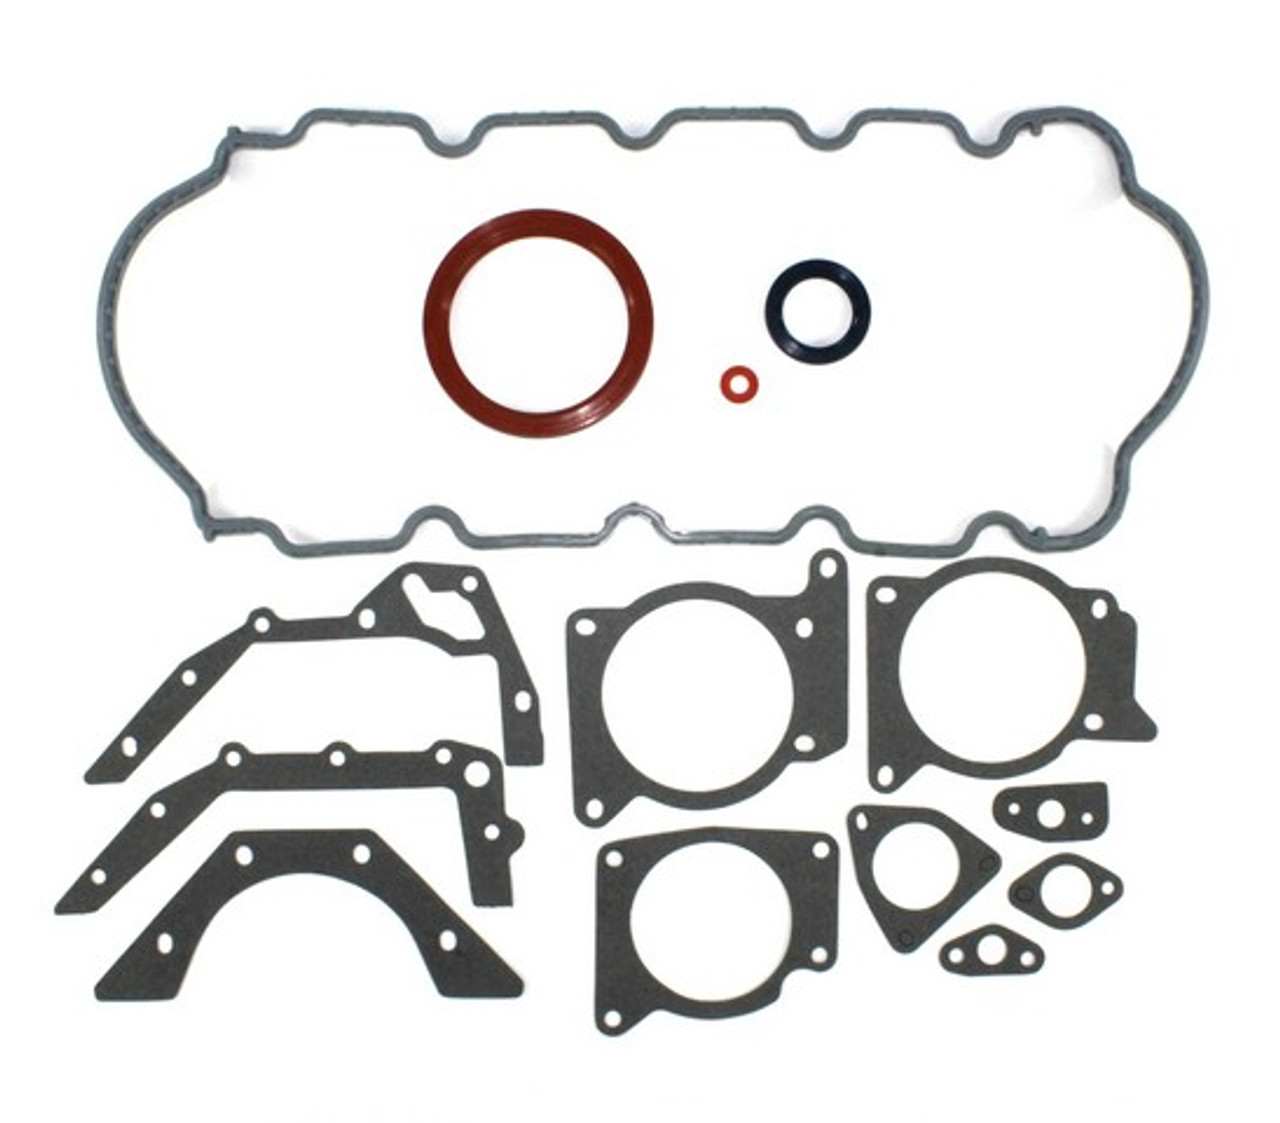 Lower Gasket Set 2.0L 2002 Ford Focus - LGS4125A.13